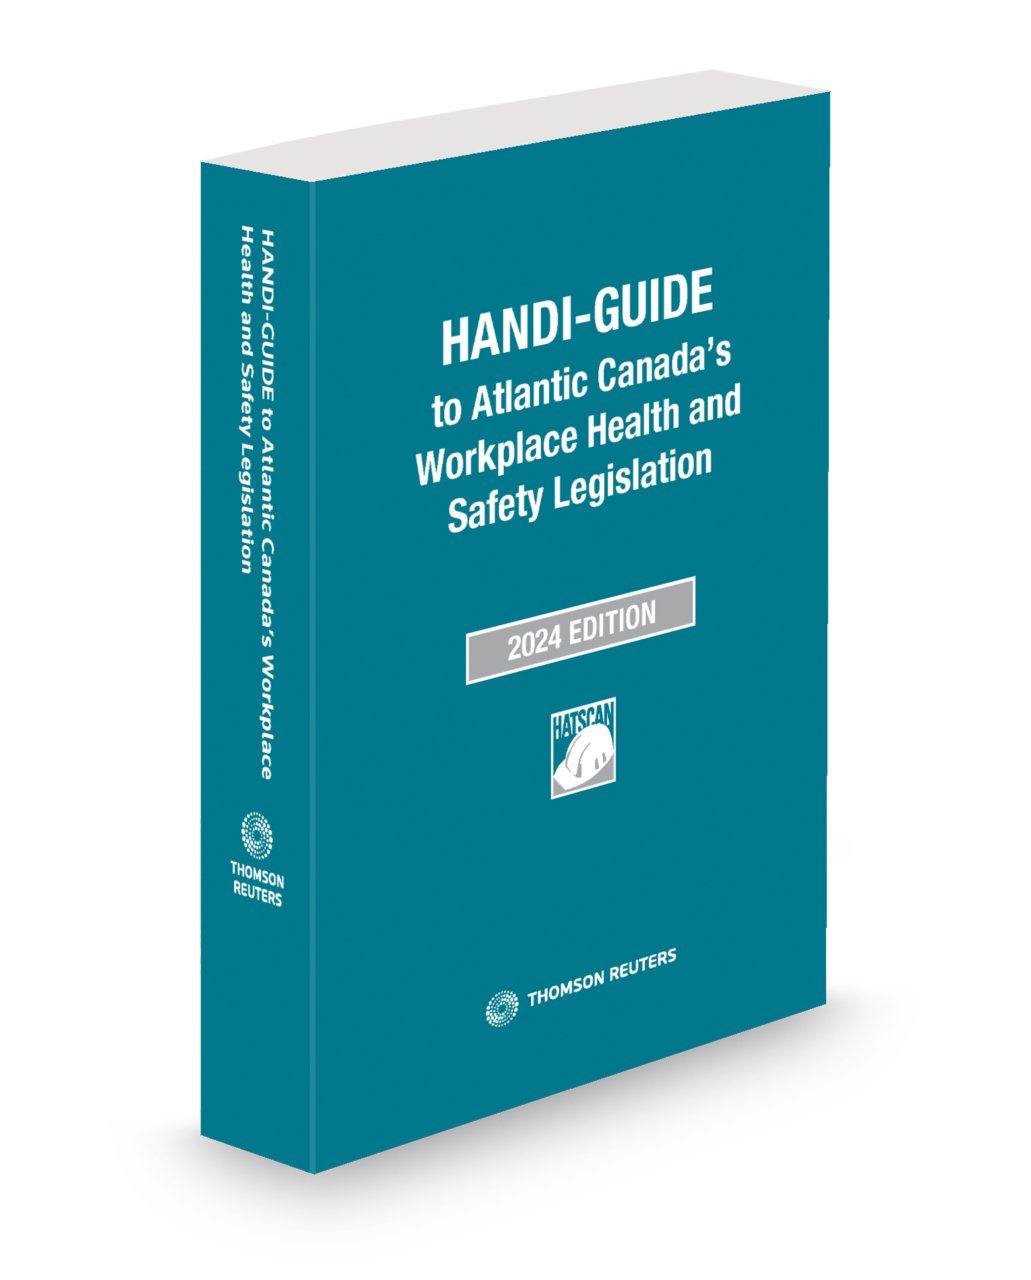 Front cover image for the HANDI-GUIDE to Atlantic Canada's Workplace Health and Safety Legislation, 2024 Edition.